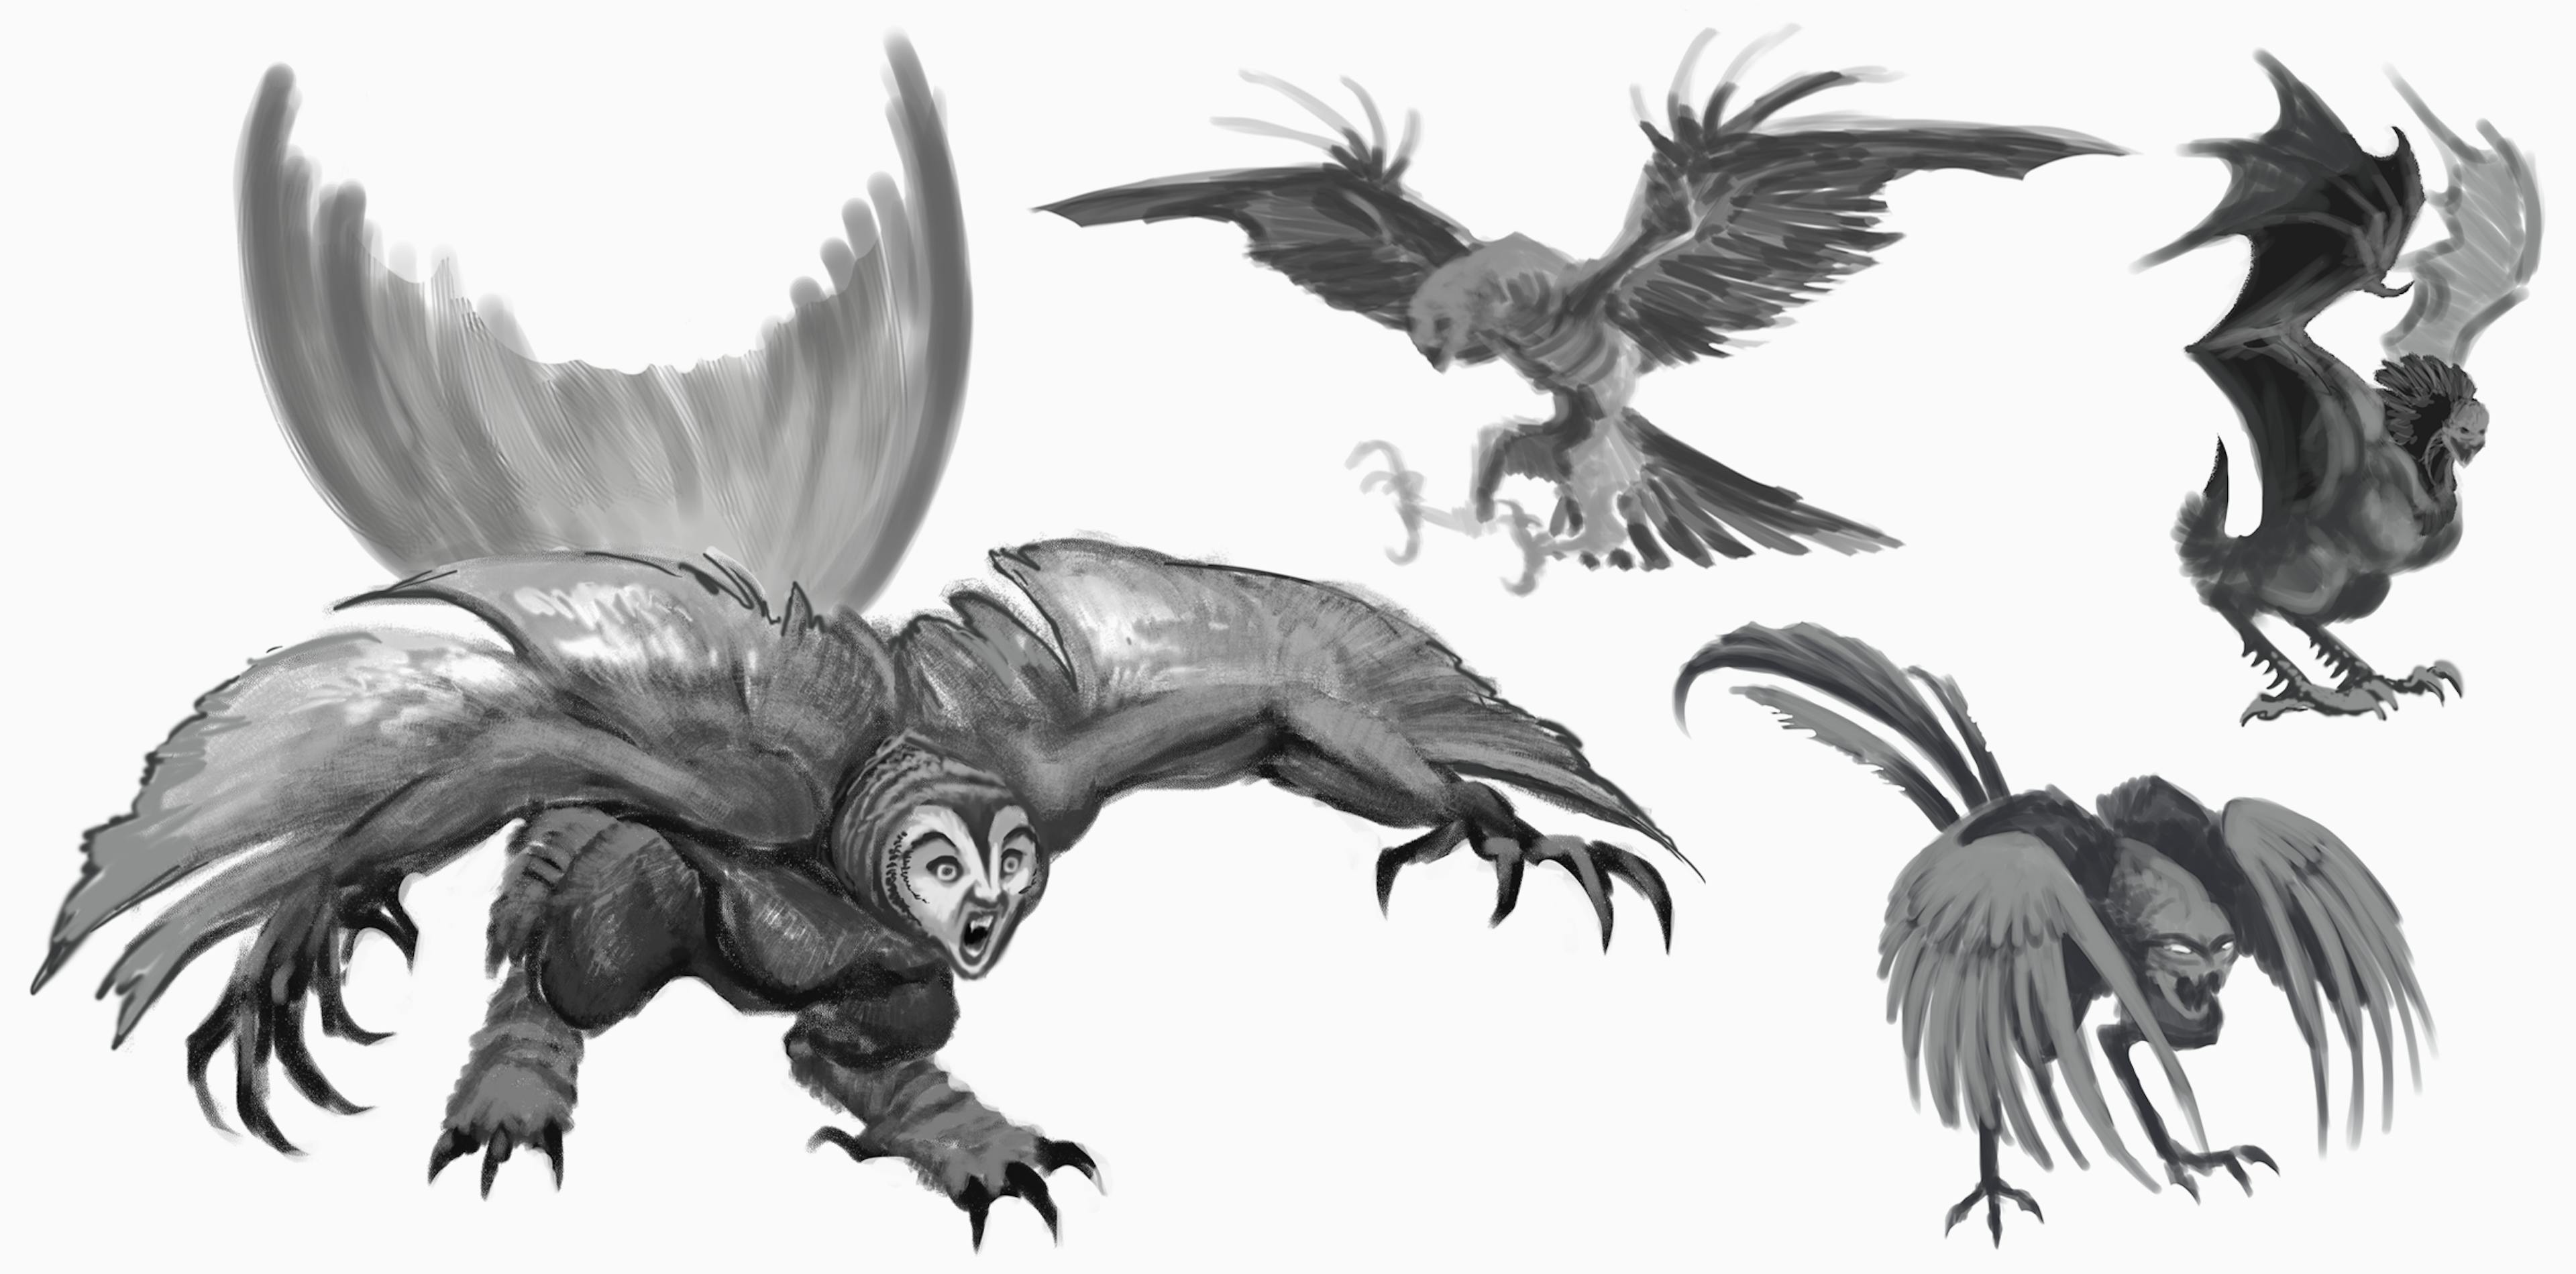 Concept art of a winged monster